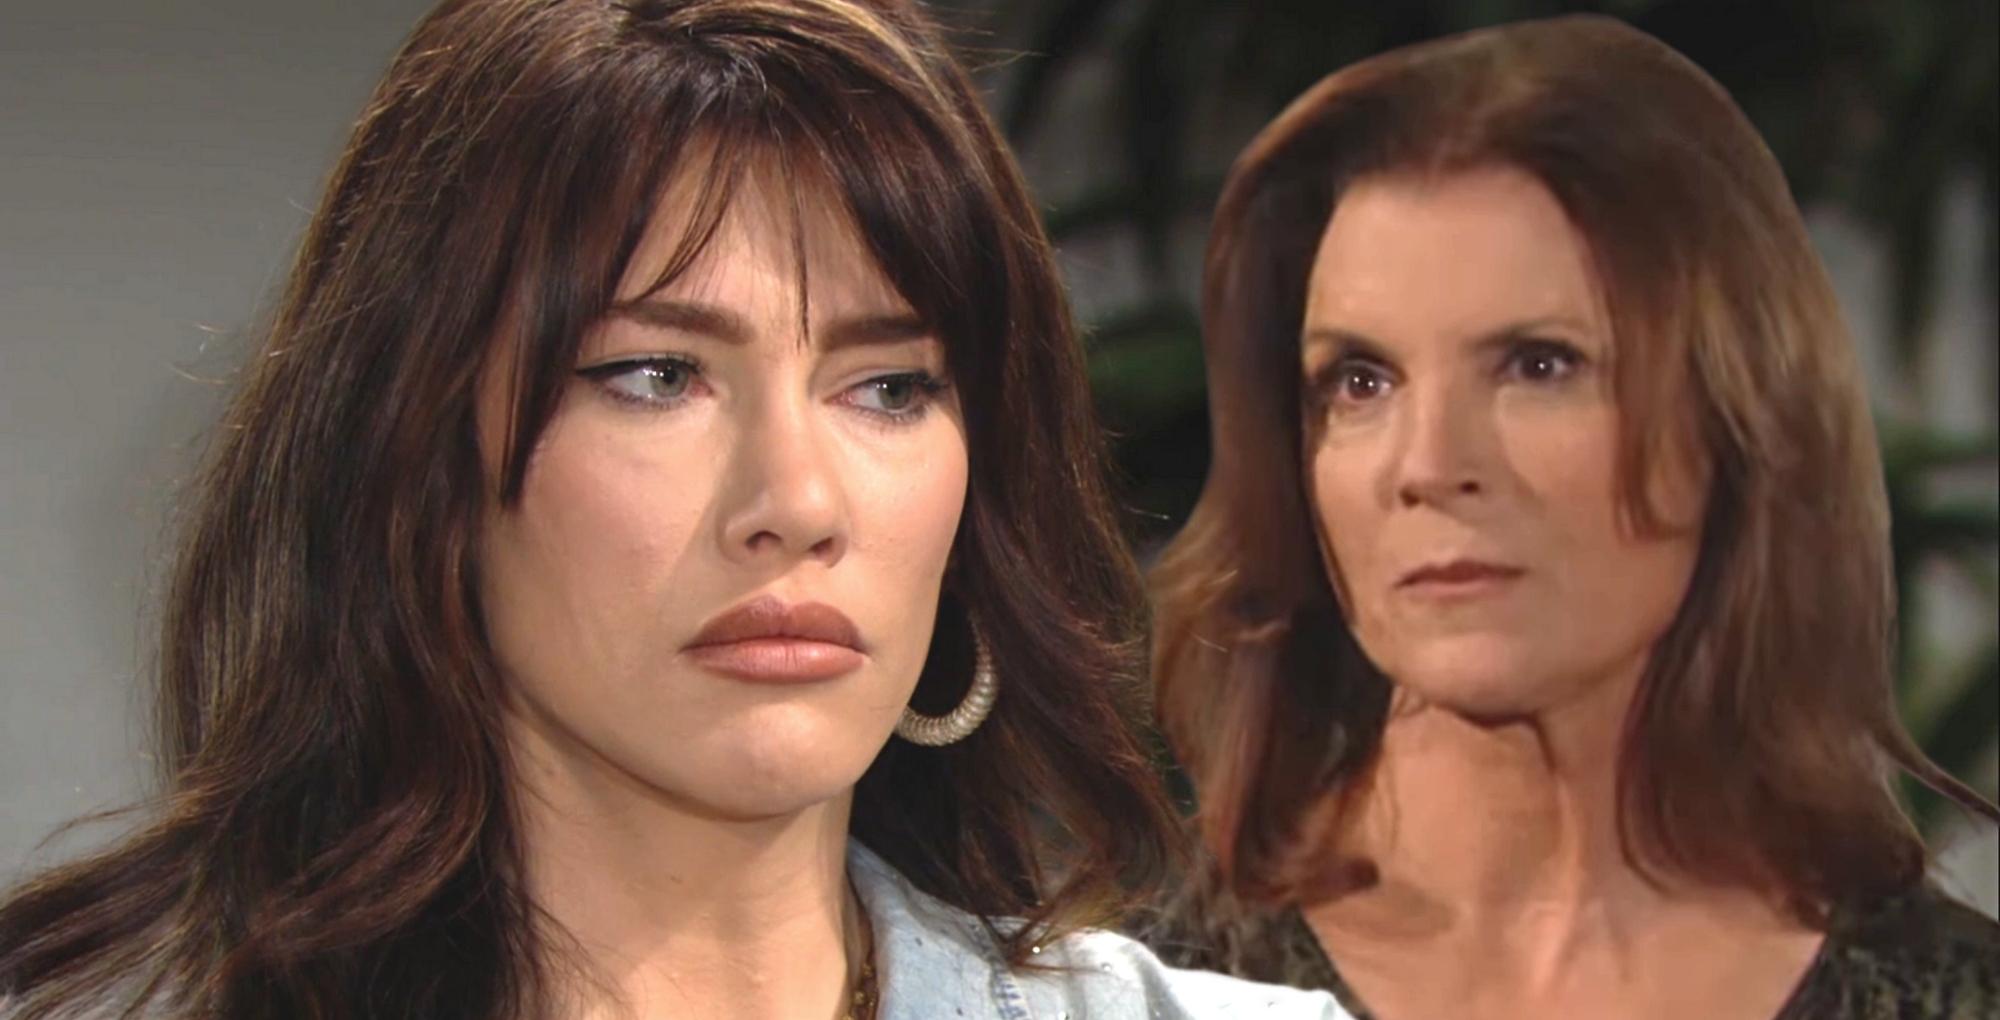 stetffy has more to worry about than sheila on bold and the beautiful.